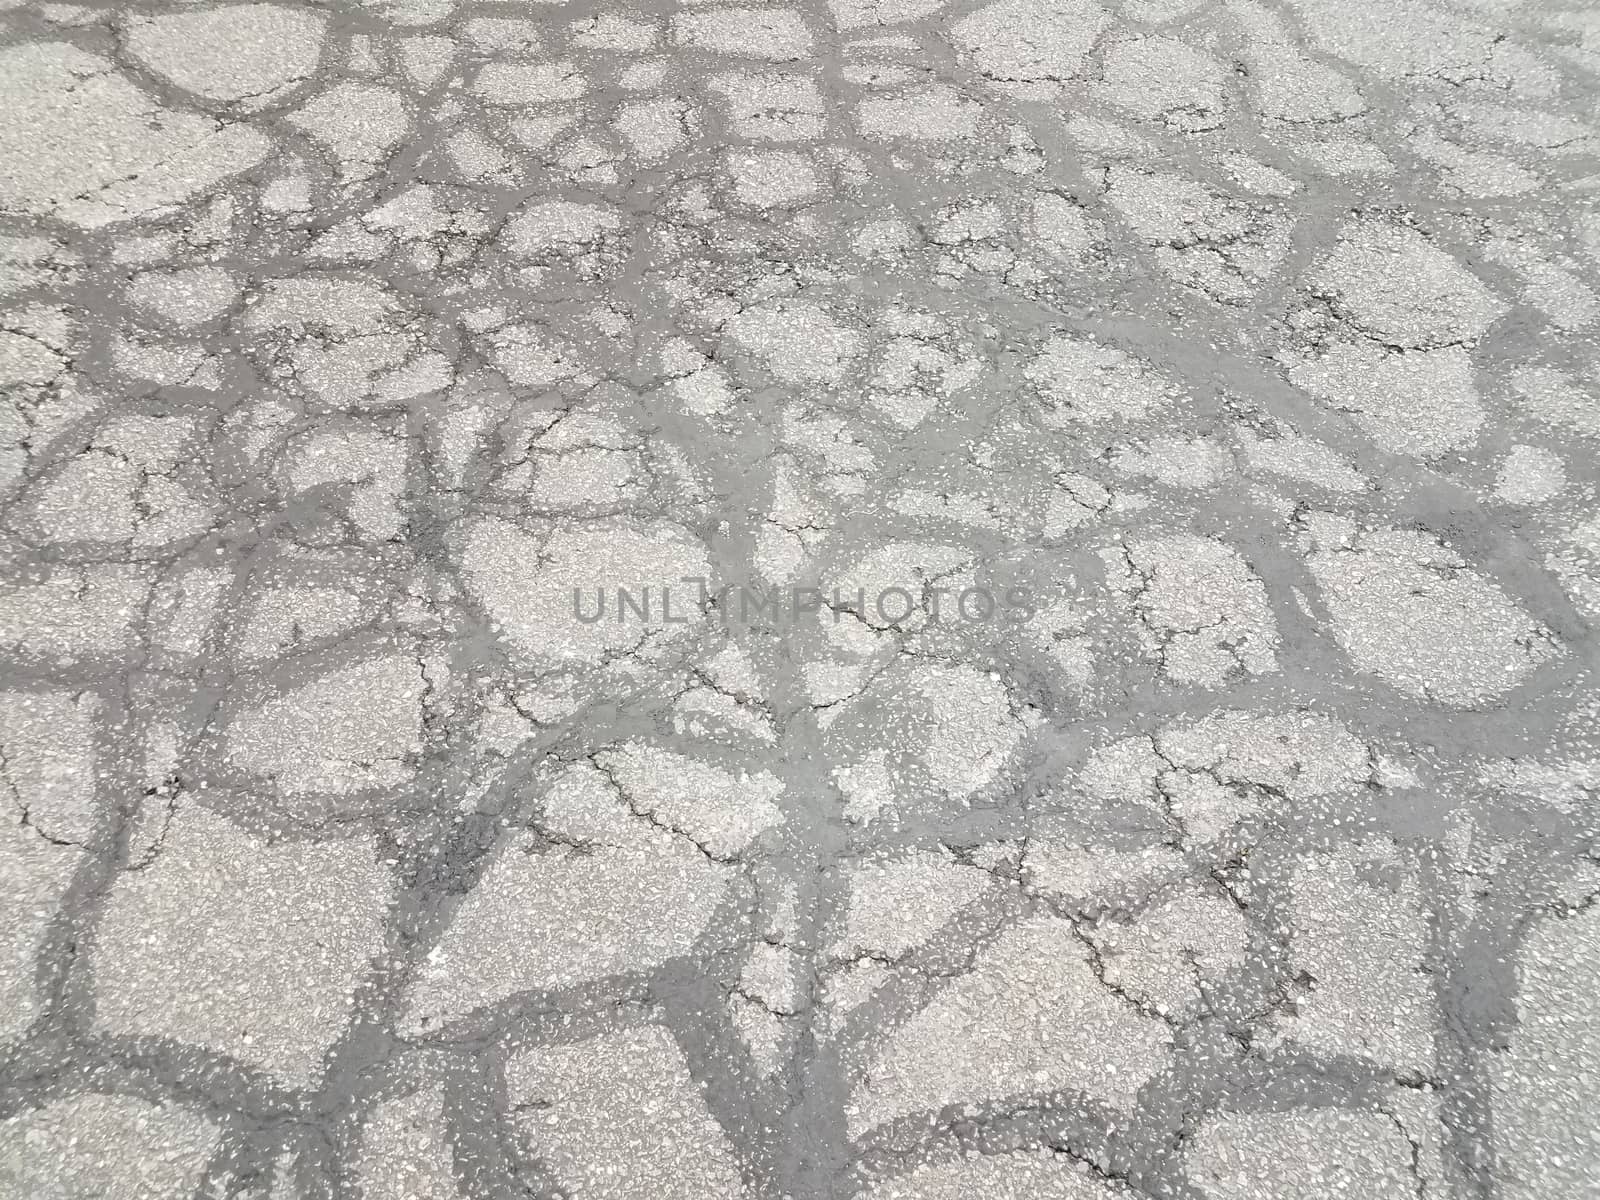 cracks and lines repaired damage in black asphalt or pavement